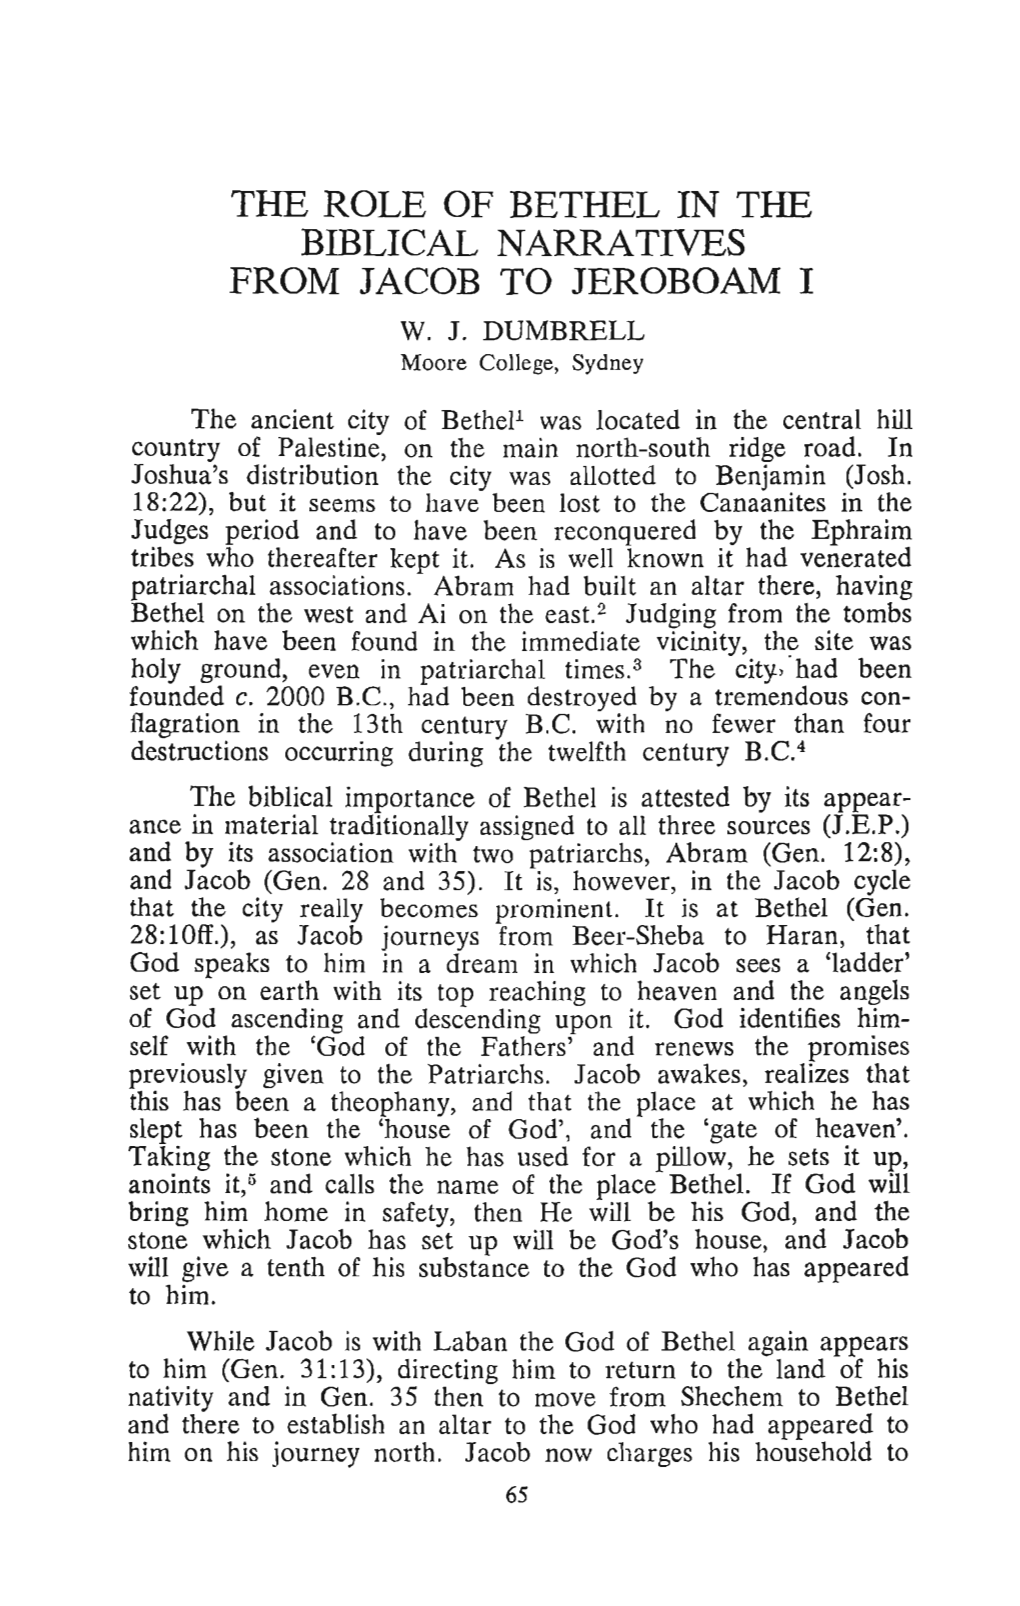 W.J. Dumbrell, "Role of Bethel in the Biblical Narratives from Jacob To